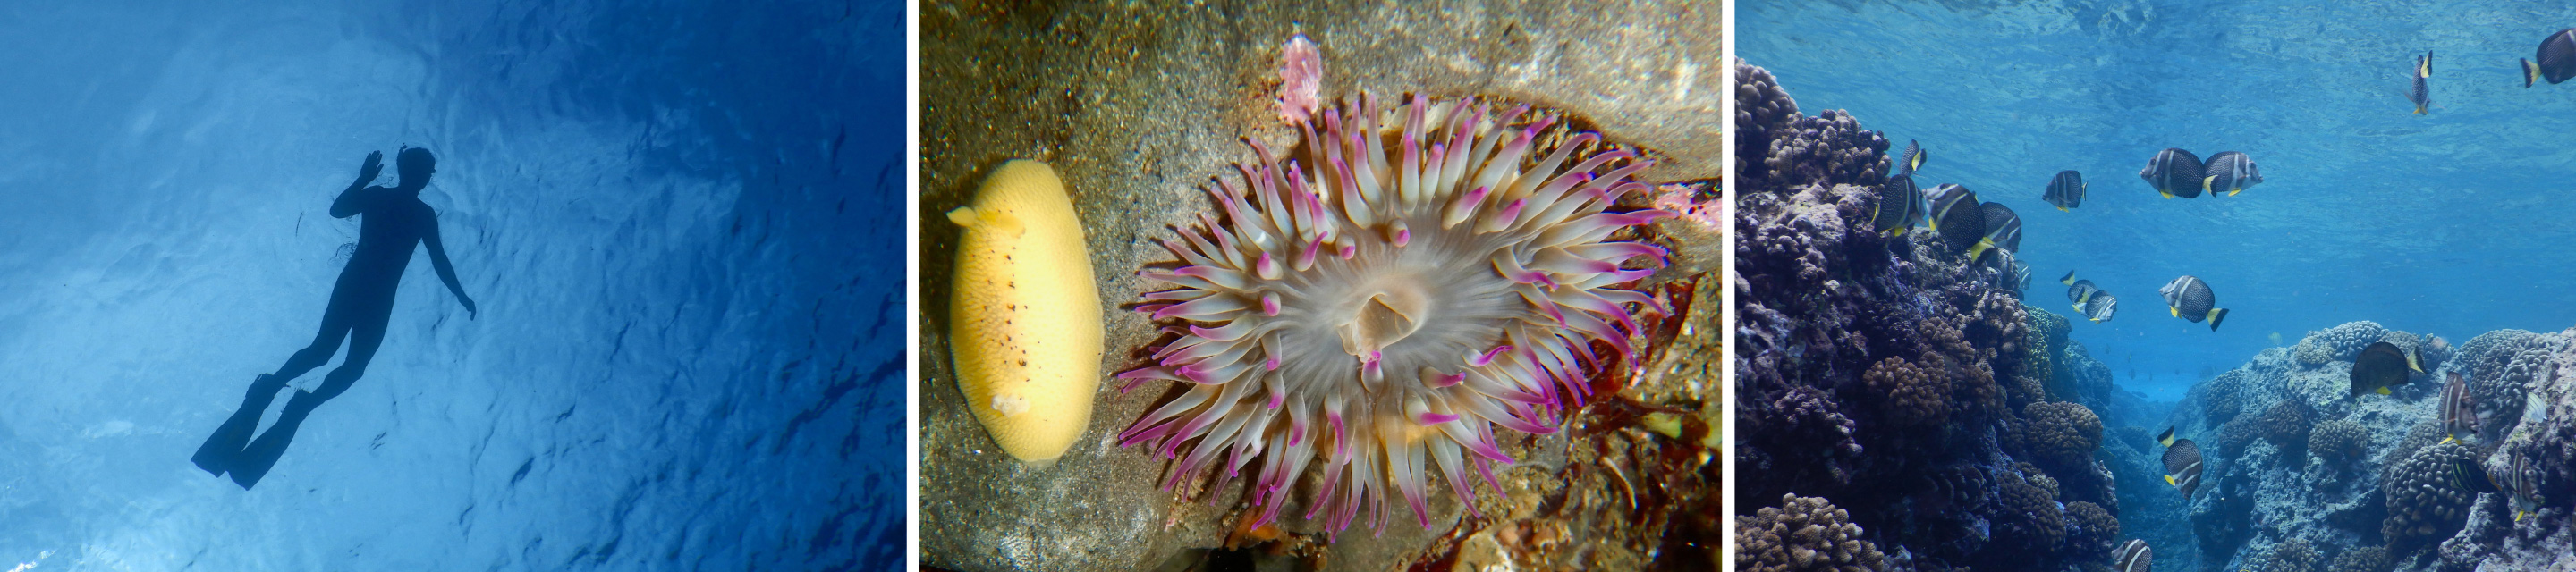 A diver, an anemone, and fish swimming with coral